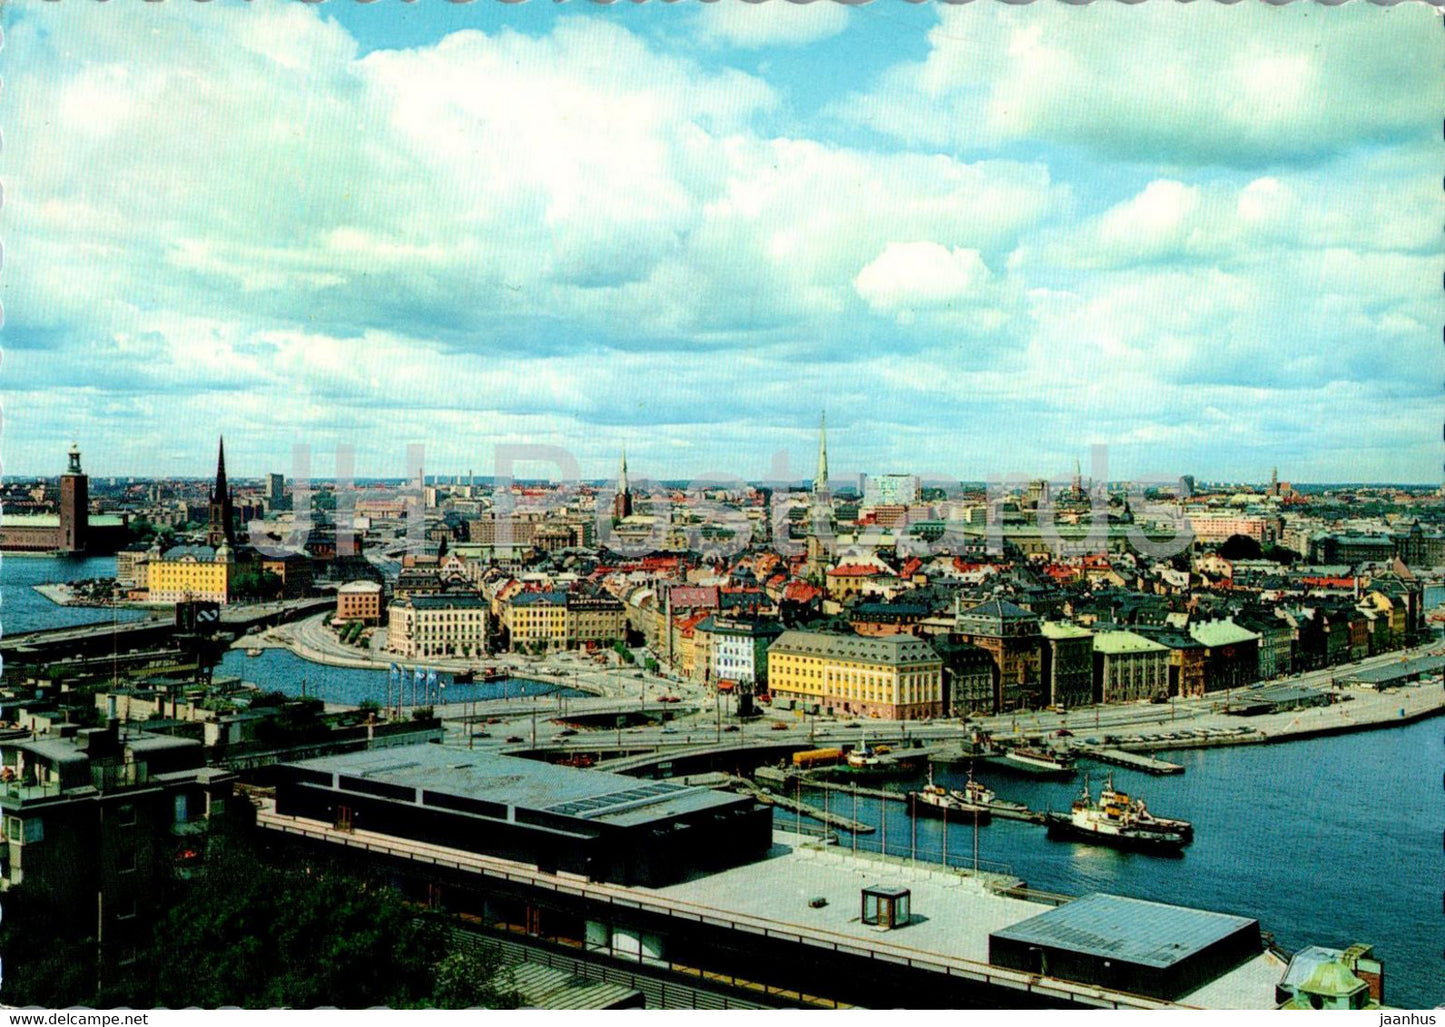 Stockholm - Utskit over Gamla Sta'n - View over the Old Town - 130/499 - Sweden - unused - JH Postcards